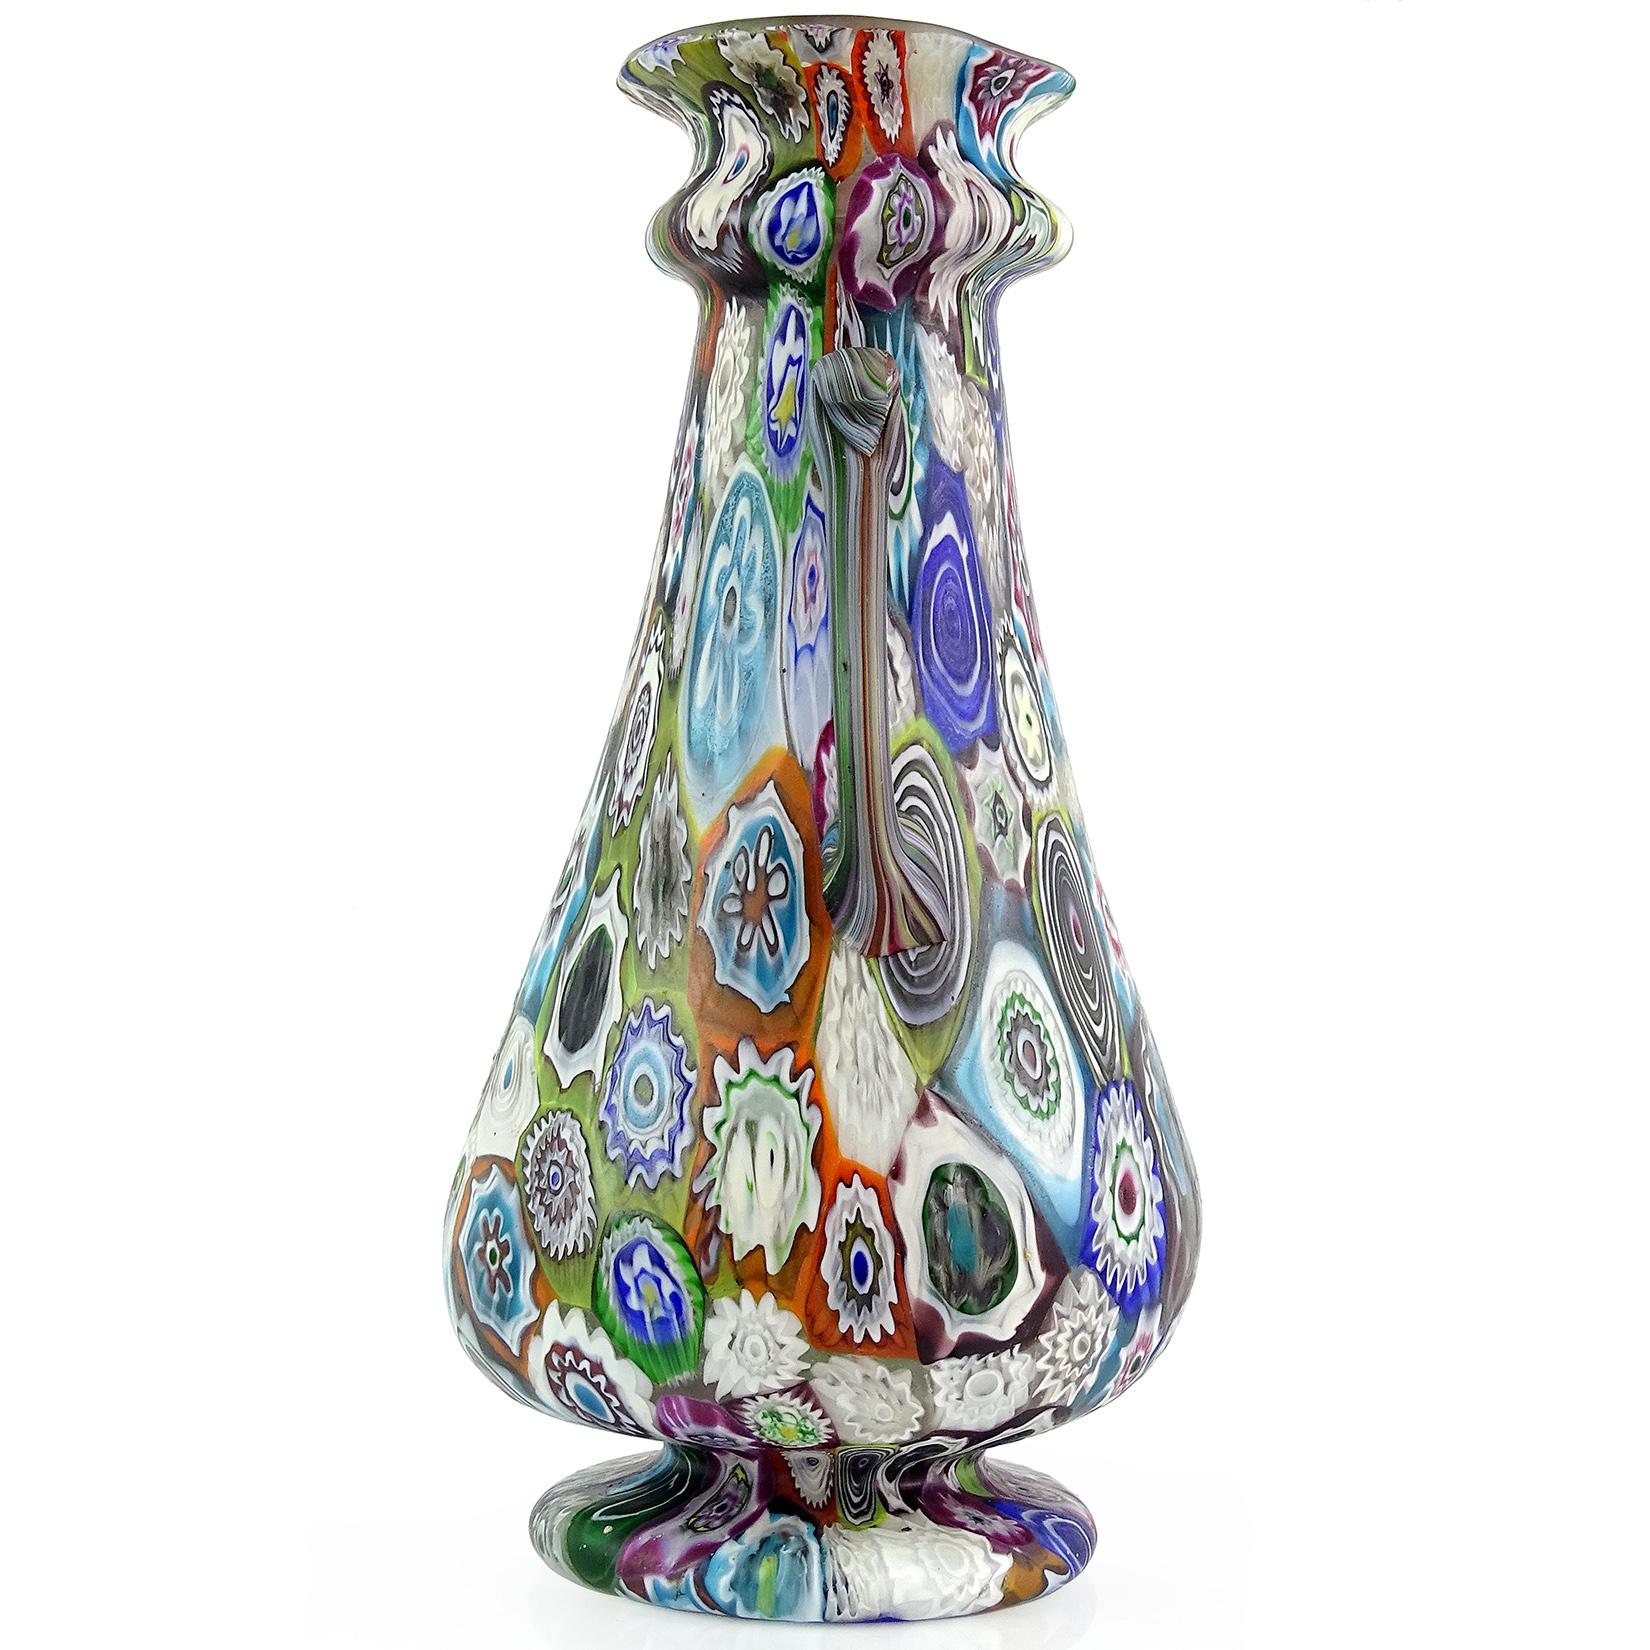 Beautiful, and large, antique Murano hand blown Millefiori Murrina flower mosaic Italian art glass decorative flower vase. Documented to the Fratelli Toso company, circa 1900-1920. The vase has a flared rim, with 2 ornate handles on the sides. It